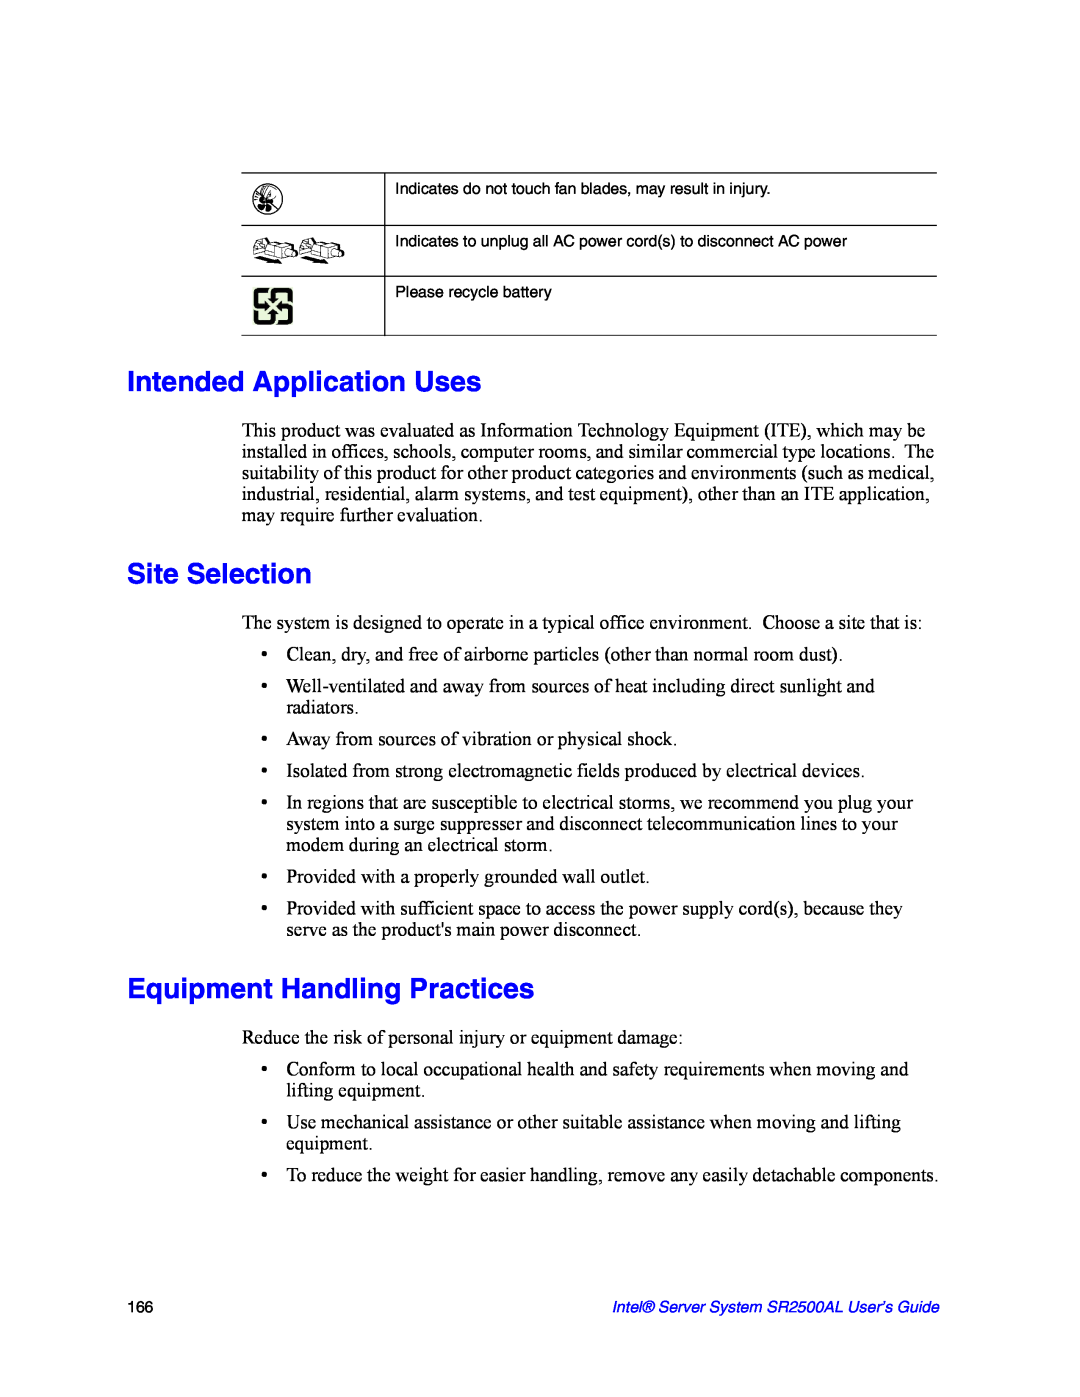 Intel SR2500AL manual Intended Application Uses, Site Selection, Equipment Handling Practices 